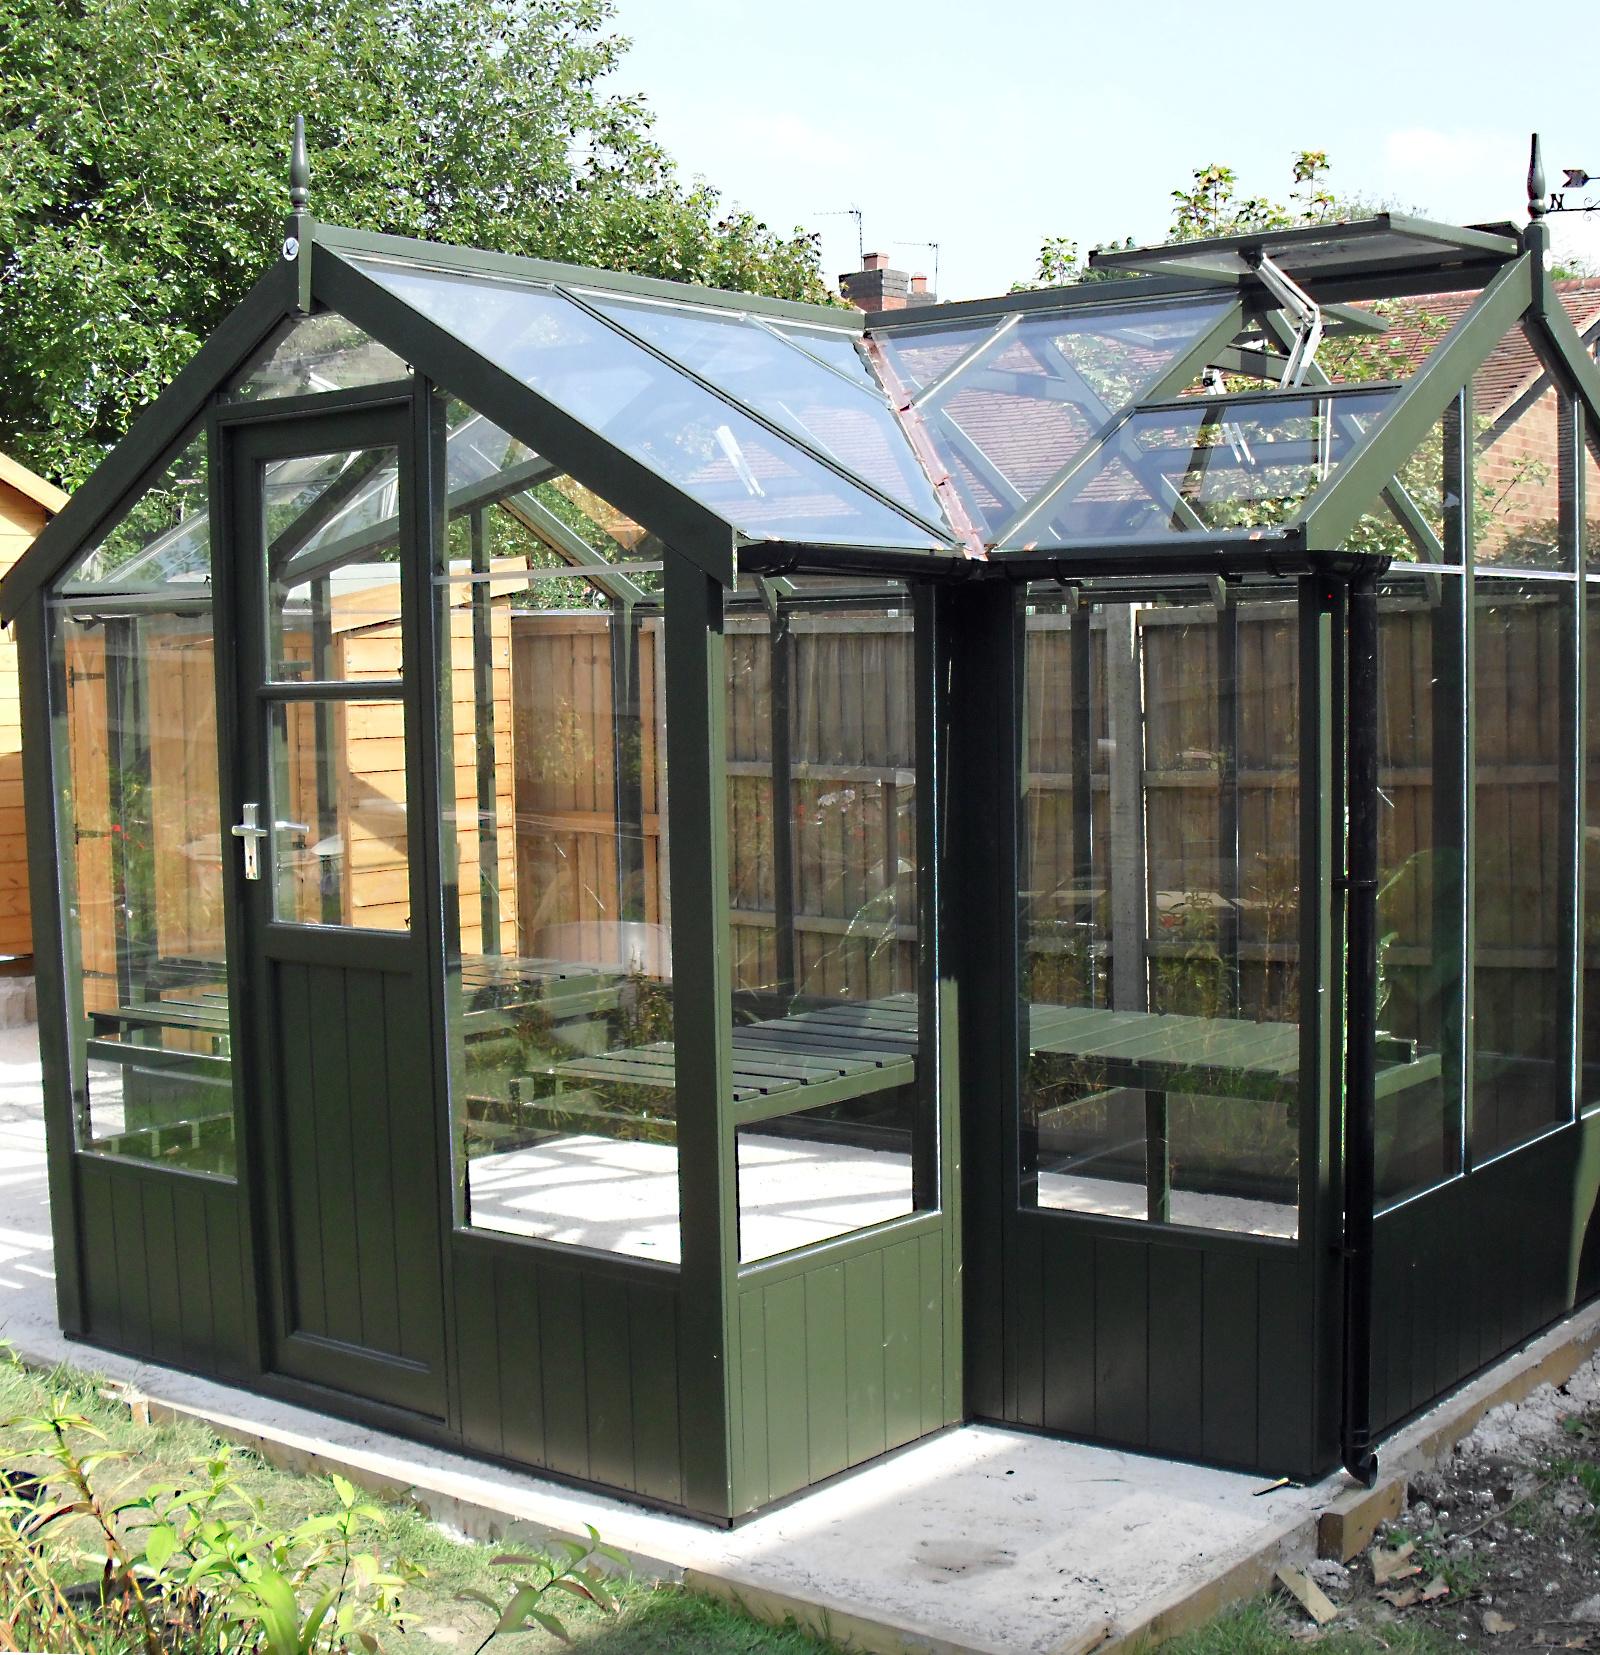 Cygnet Greenhouse painted Olive